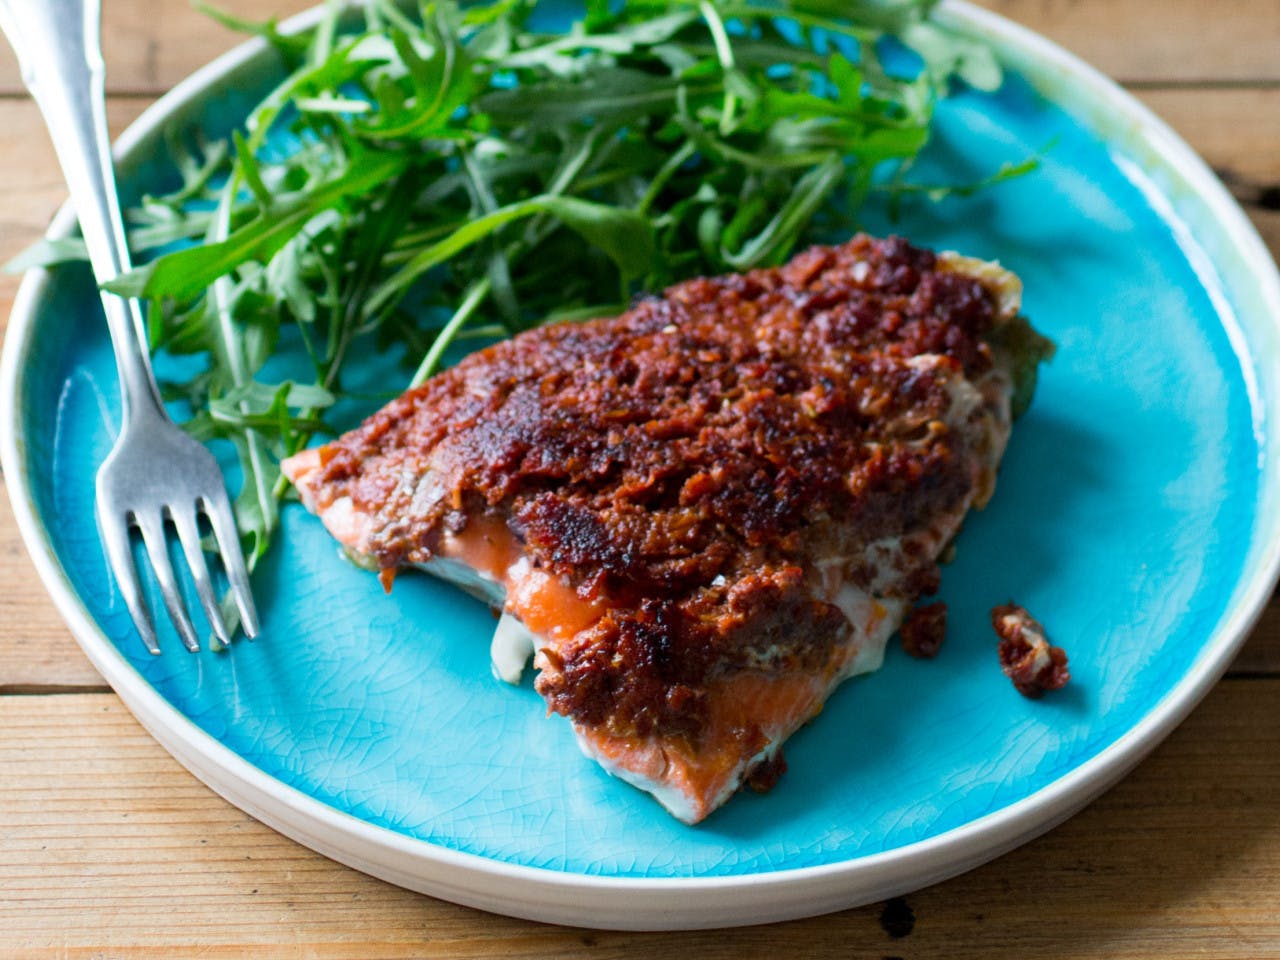 Wild salmon with red tapenade